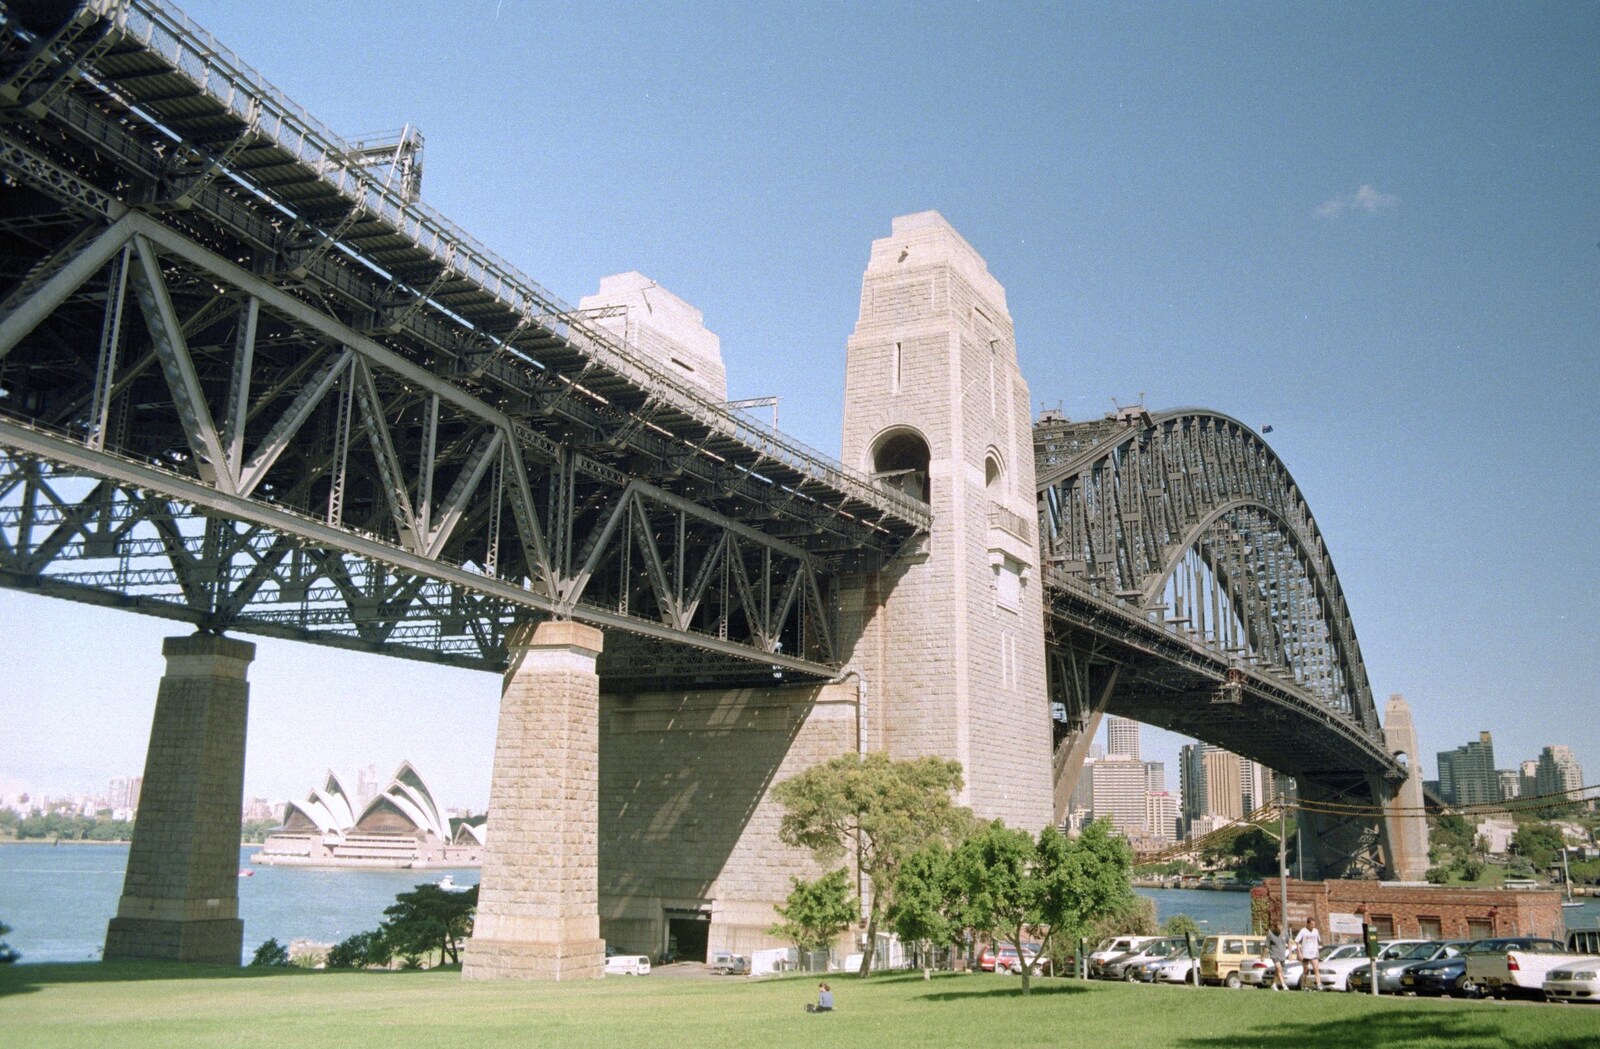 A view of the bridge from North Sydney from A Trip to the Zoo, Sydney, Australia - 7th April 2000